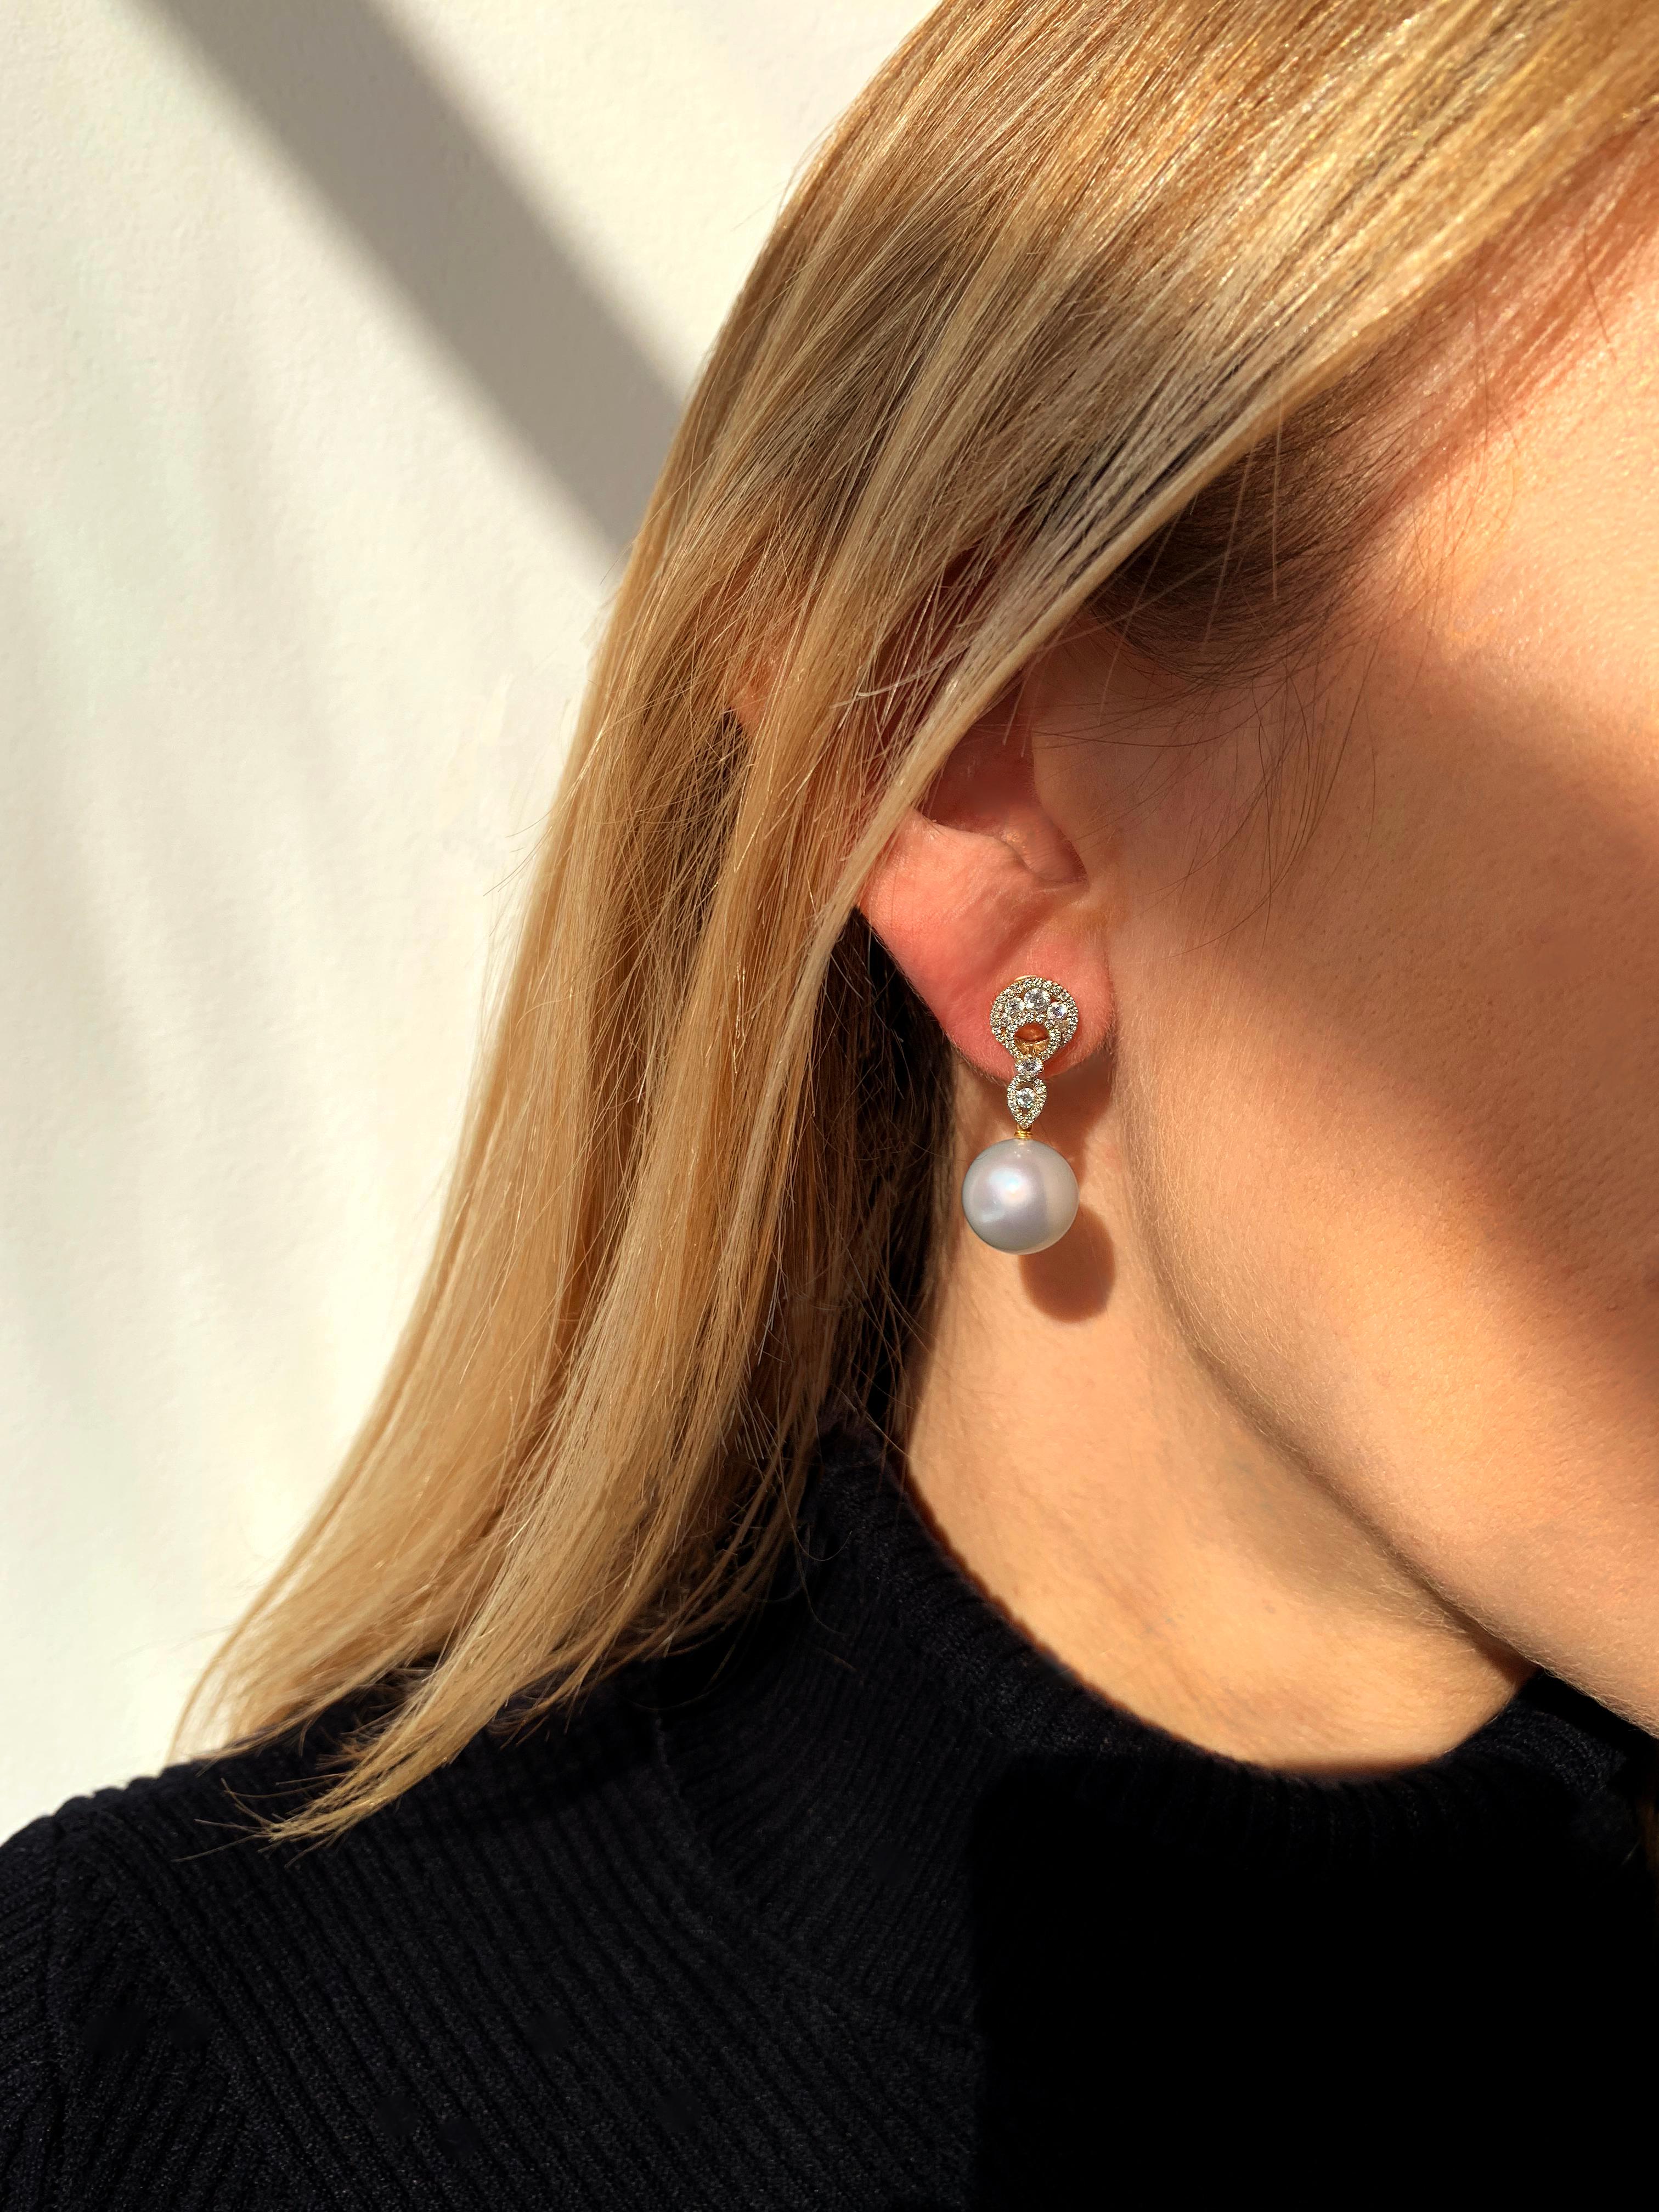 These scintillating earrings by Yoko London feature lustrous South Sea pearls beneath an elegant arrangement of diamonds. The 18 Karat yellow gold setting serves to enrich the radiance of the diamonds and the crisp white lustre of the South Sea